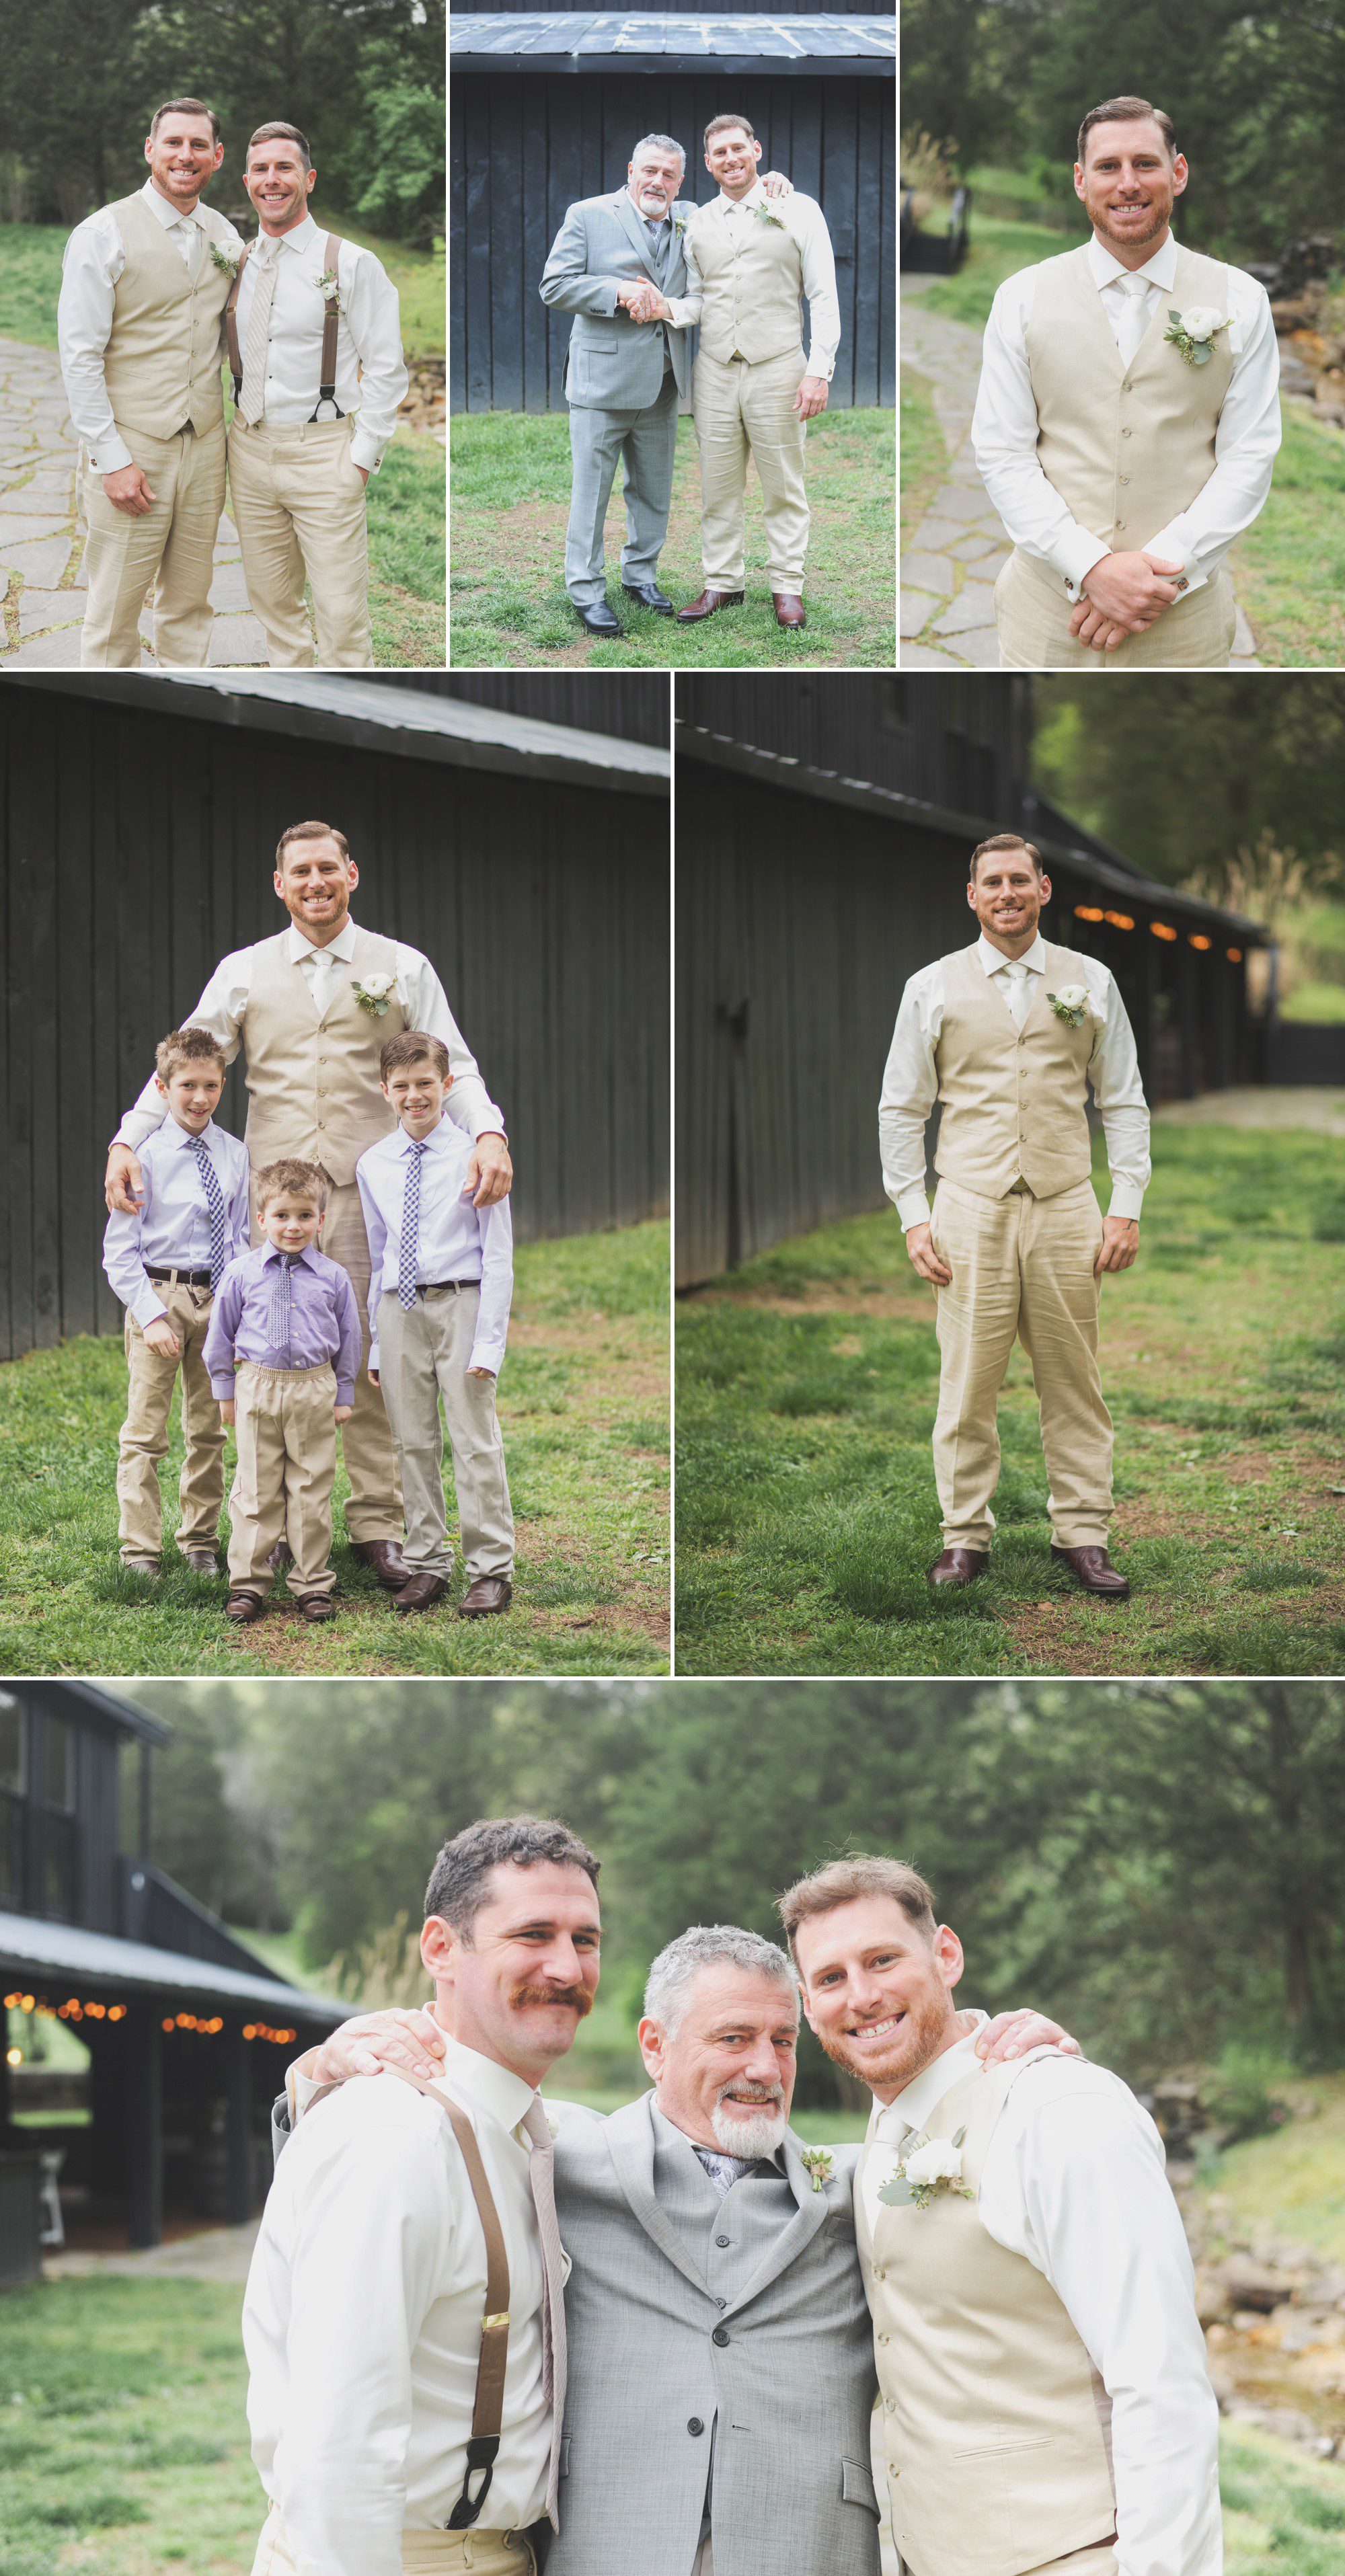 groom and groomsmen, family and kids before the wedding ceremony at Cedarwood weddings in Nashville, TN. April spring wedding, photos by Krista Lee Photography.